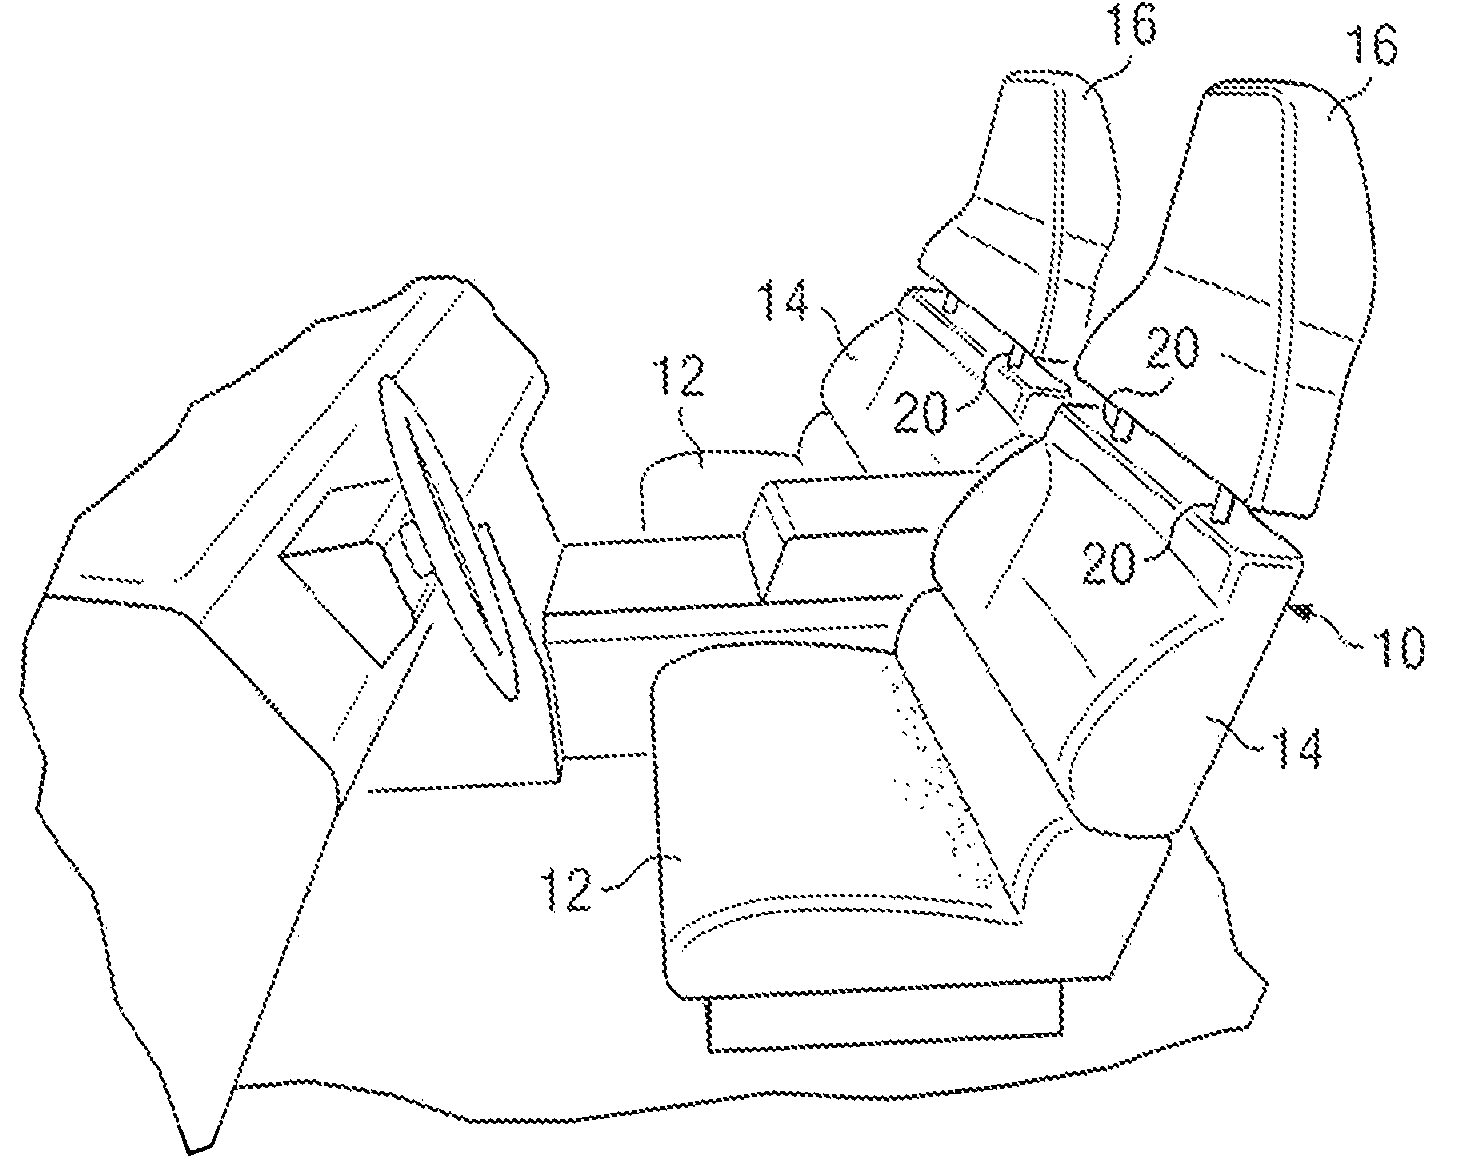 Adjustable seat for automobiles and trucks